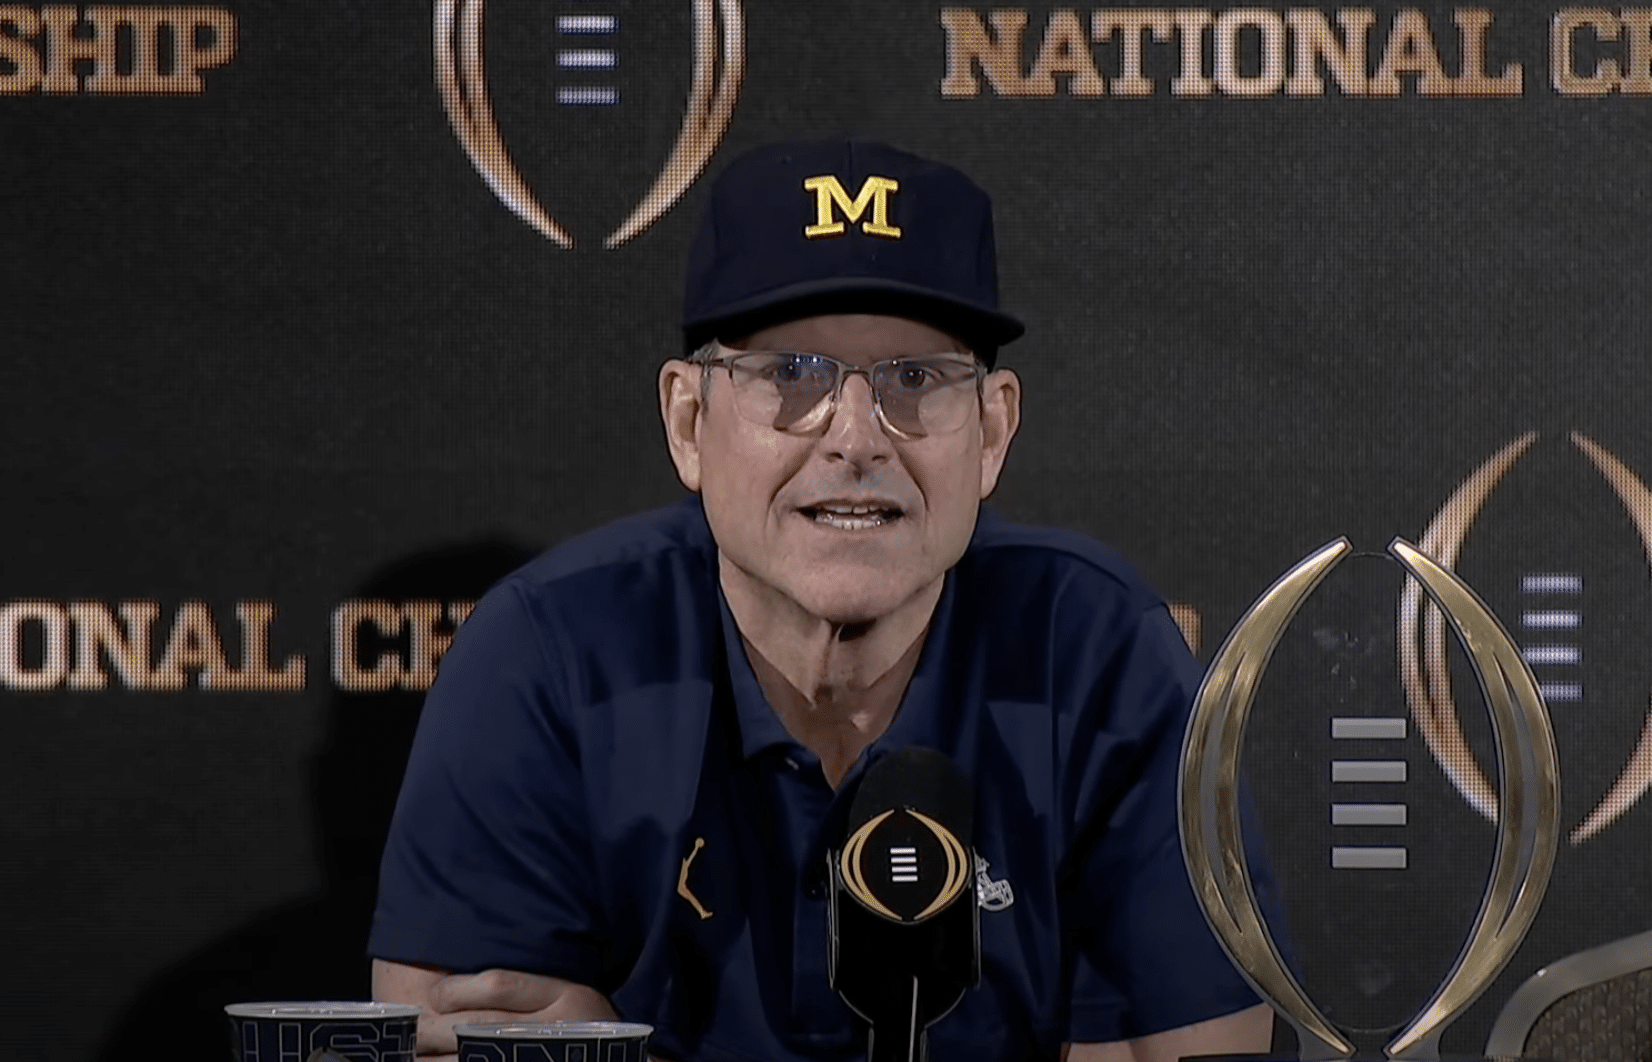 Jim Harbaugh leaves Michigan Jim Harbaugh reveals tattoo he will get NCAA President weighs in on fairness of Michigan Michigan head coach Jim Harbaugh lands interview Jim Harbaugh coaching odds Jim Harbaugh to meet Jim Harbaugh negotiations with Michigan